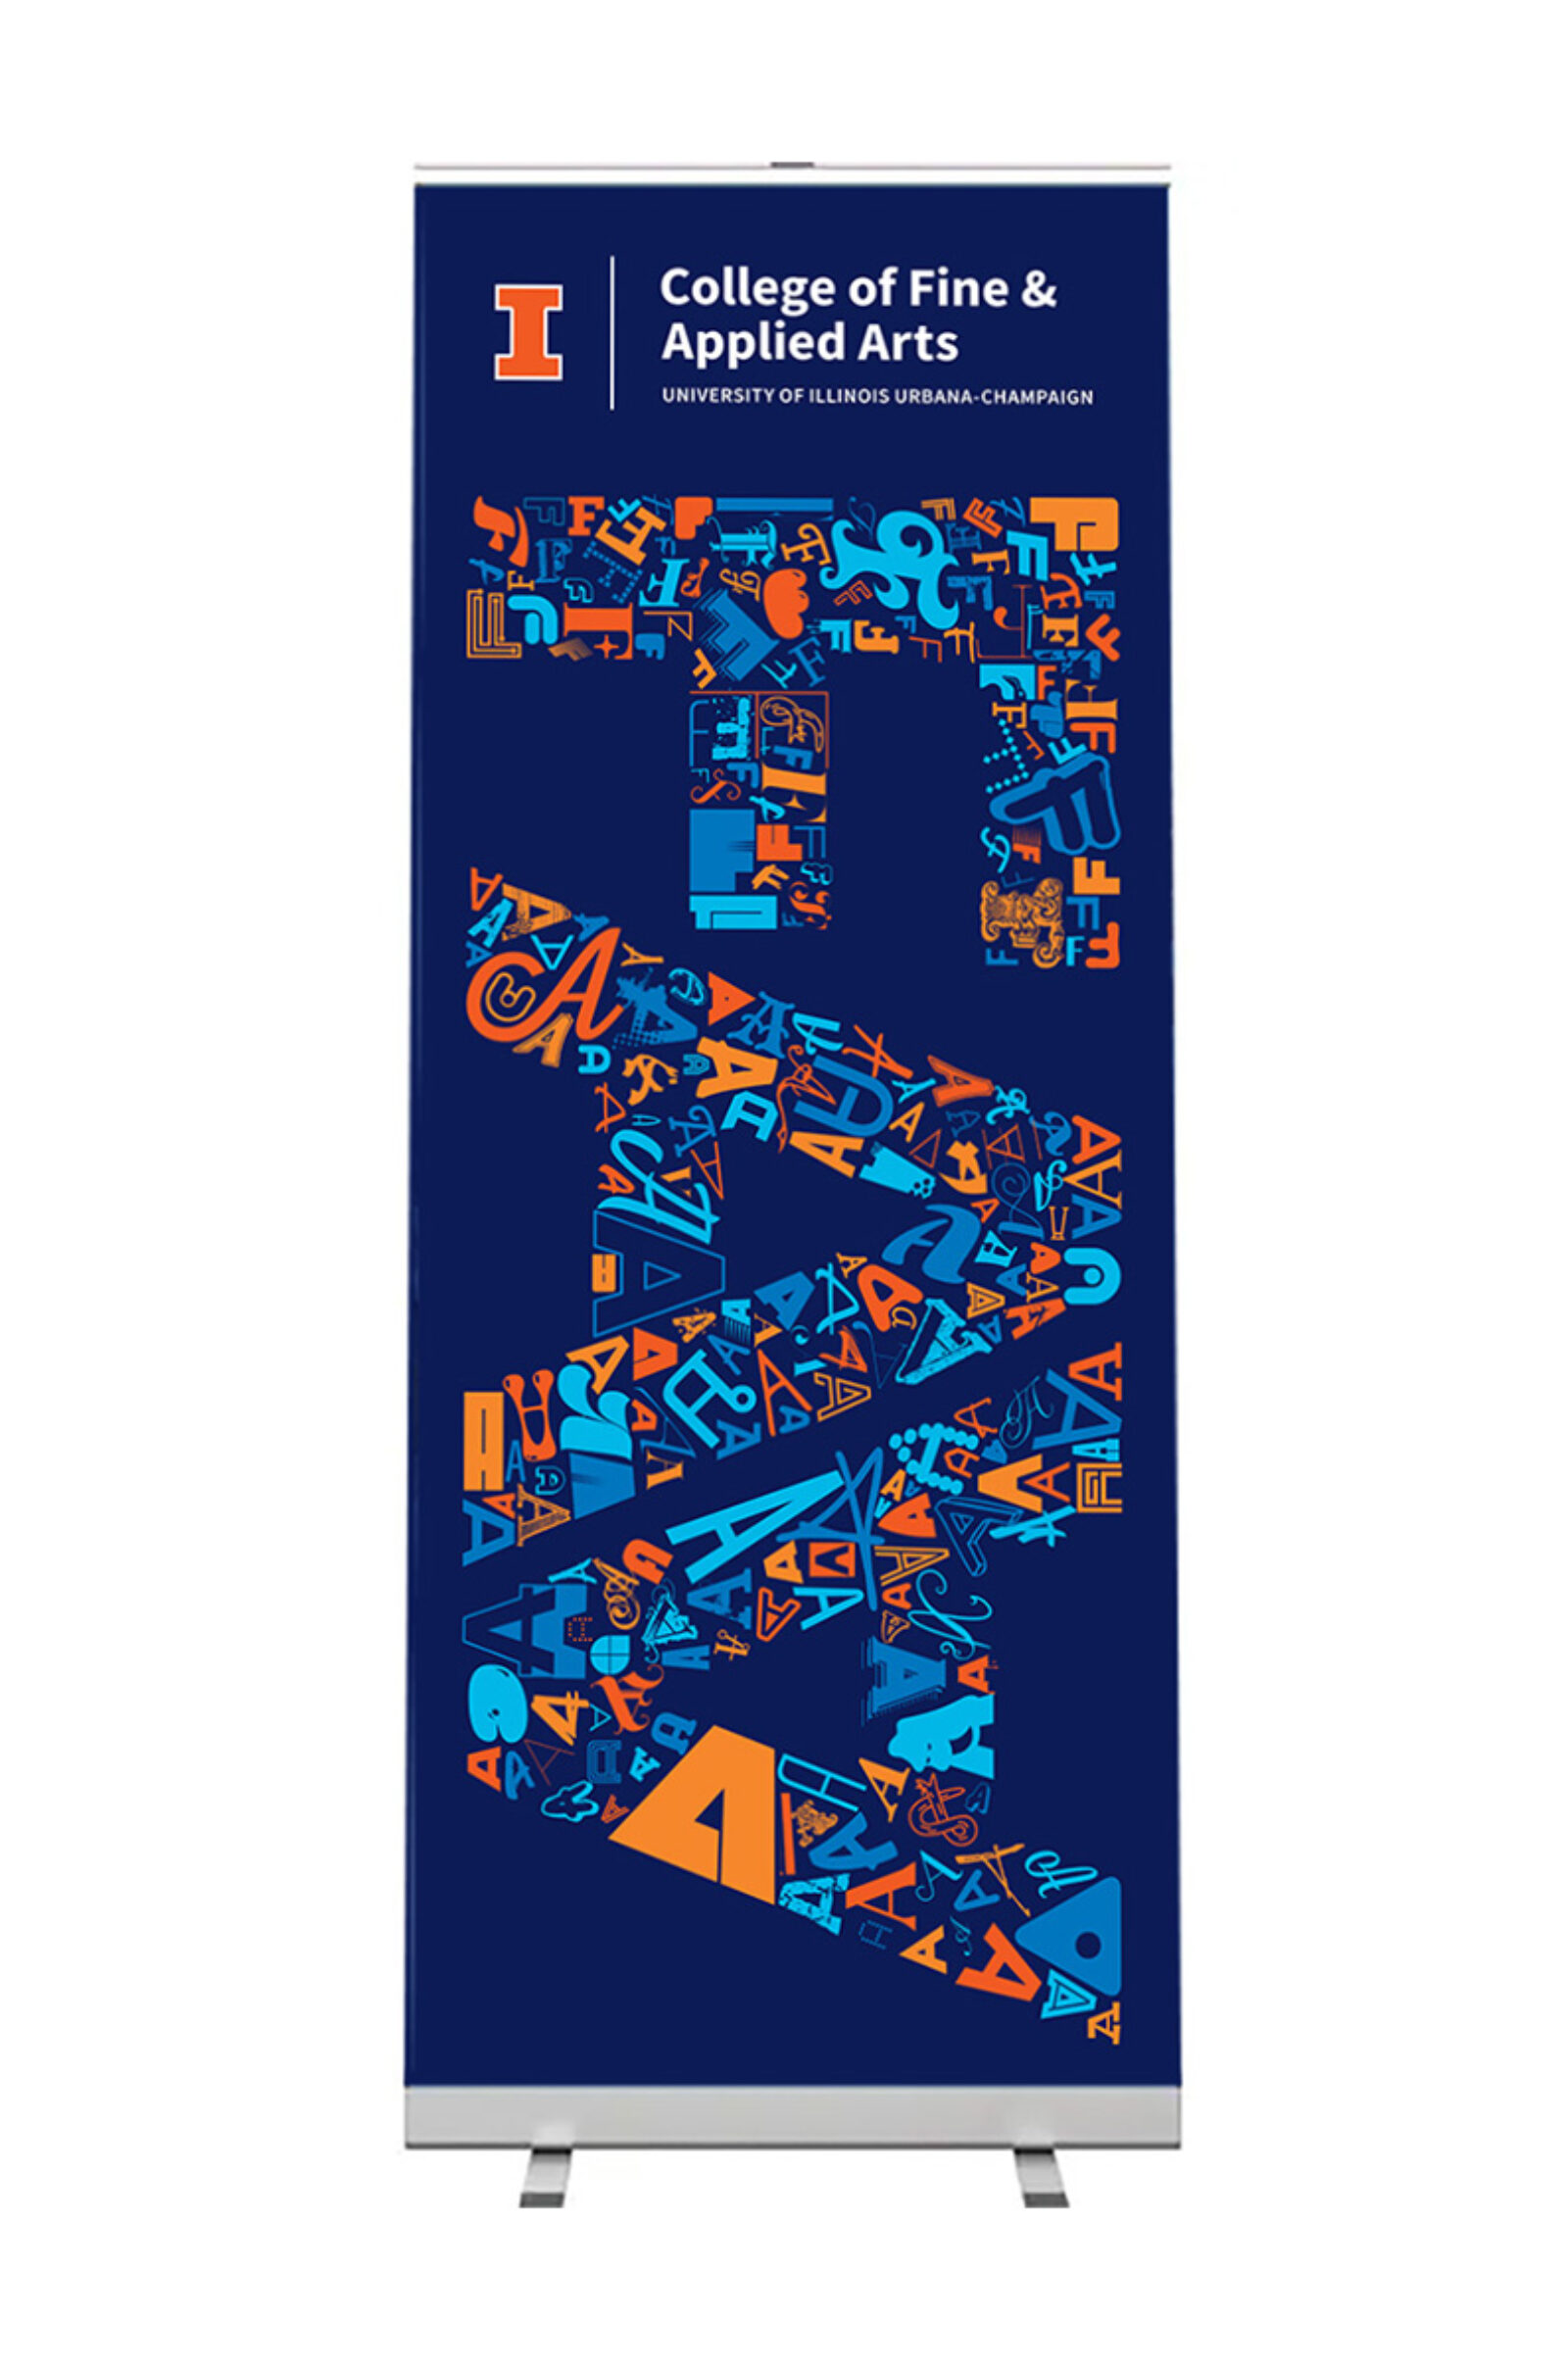 Large blue banner with letters FAA made up of those letters in different typefaces and colors